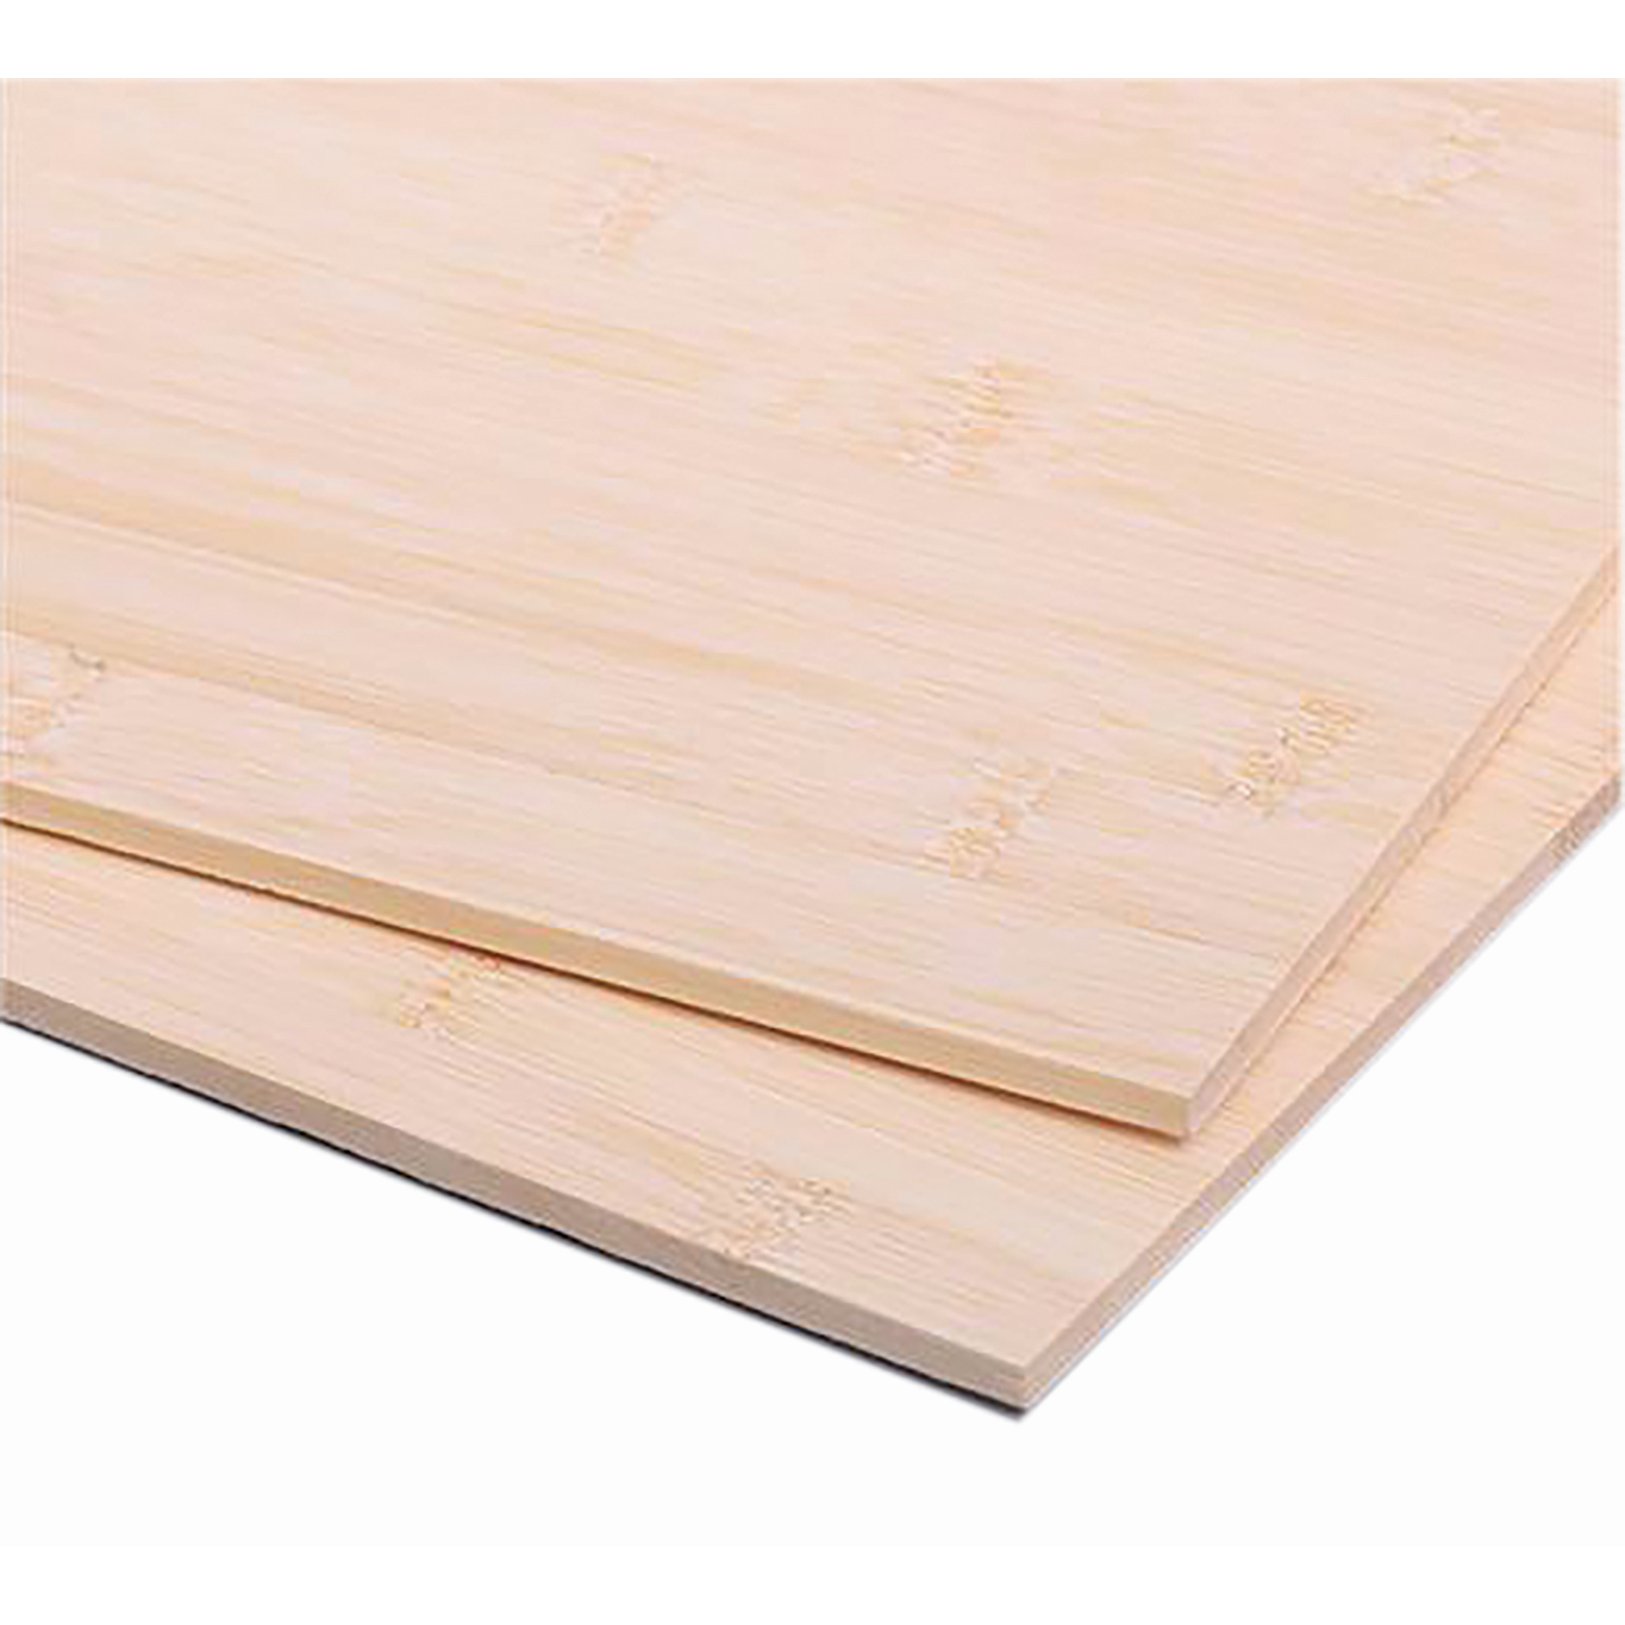 OUT OF STOCK - Bamboo Sheet - 600 x 400 x 5mm (Pack of 5)